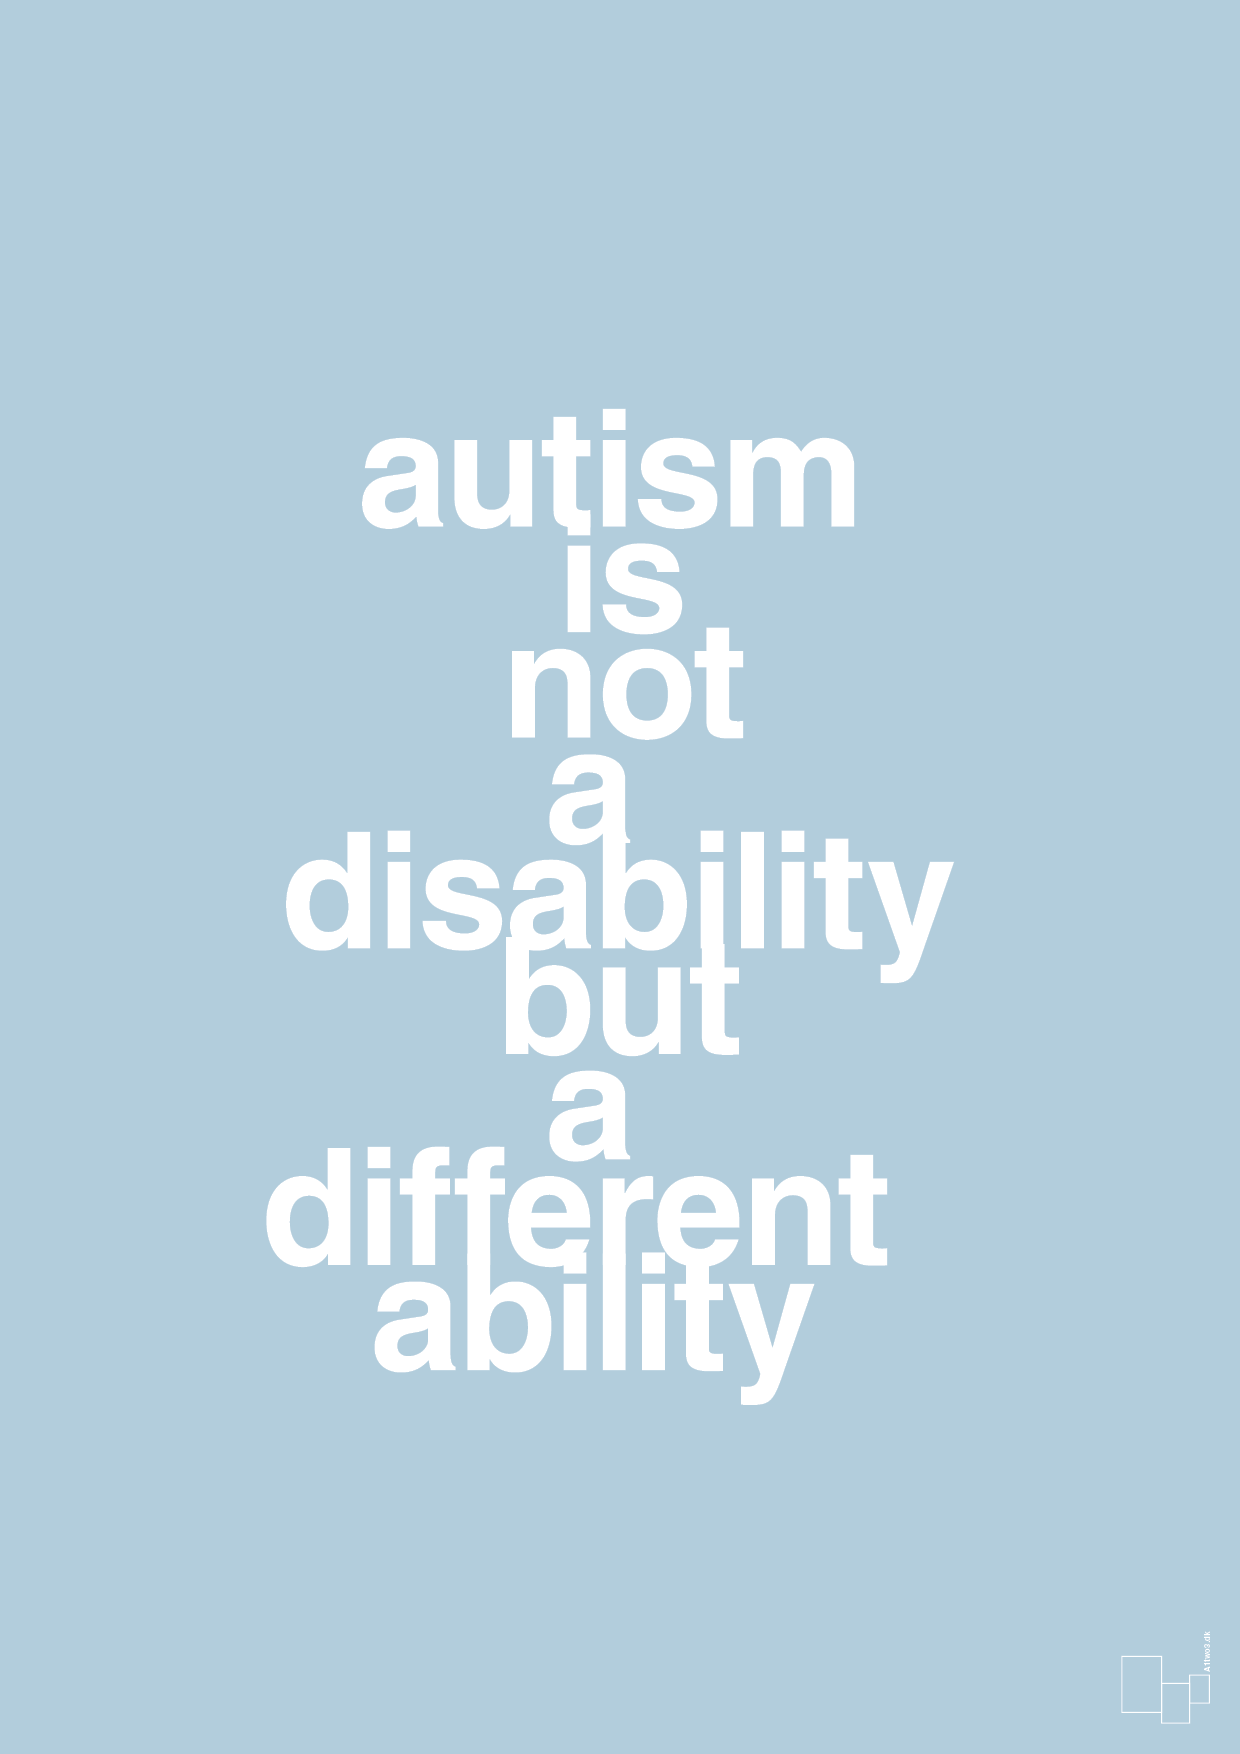 autism is not a disability but a different ability - Plakat med Samfund i Heavenly Blue